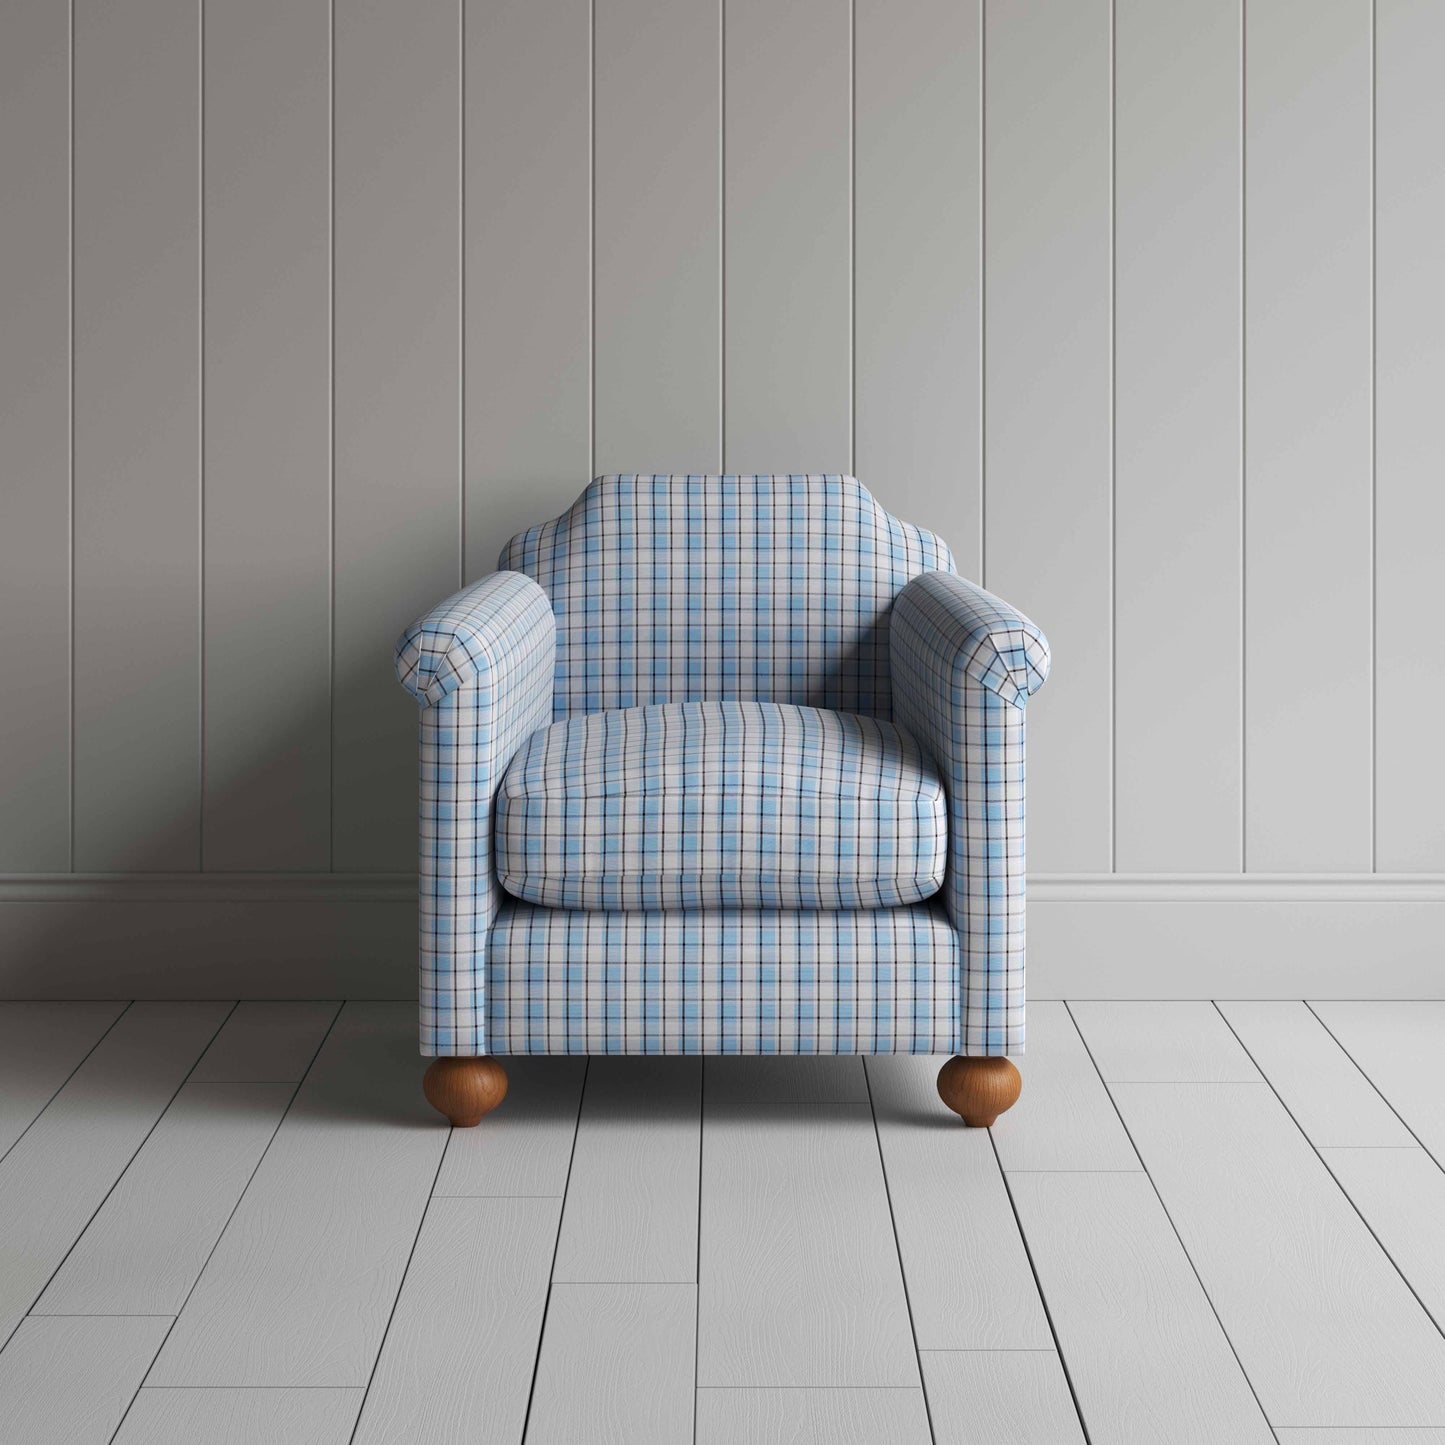 Dolittle Armchair in Square Deal Cotton, Blue Brown